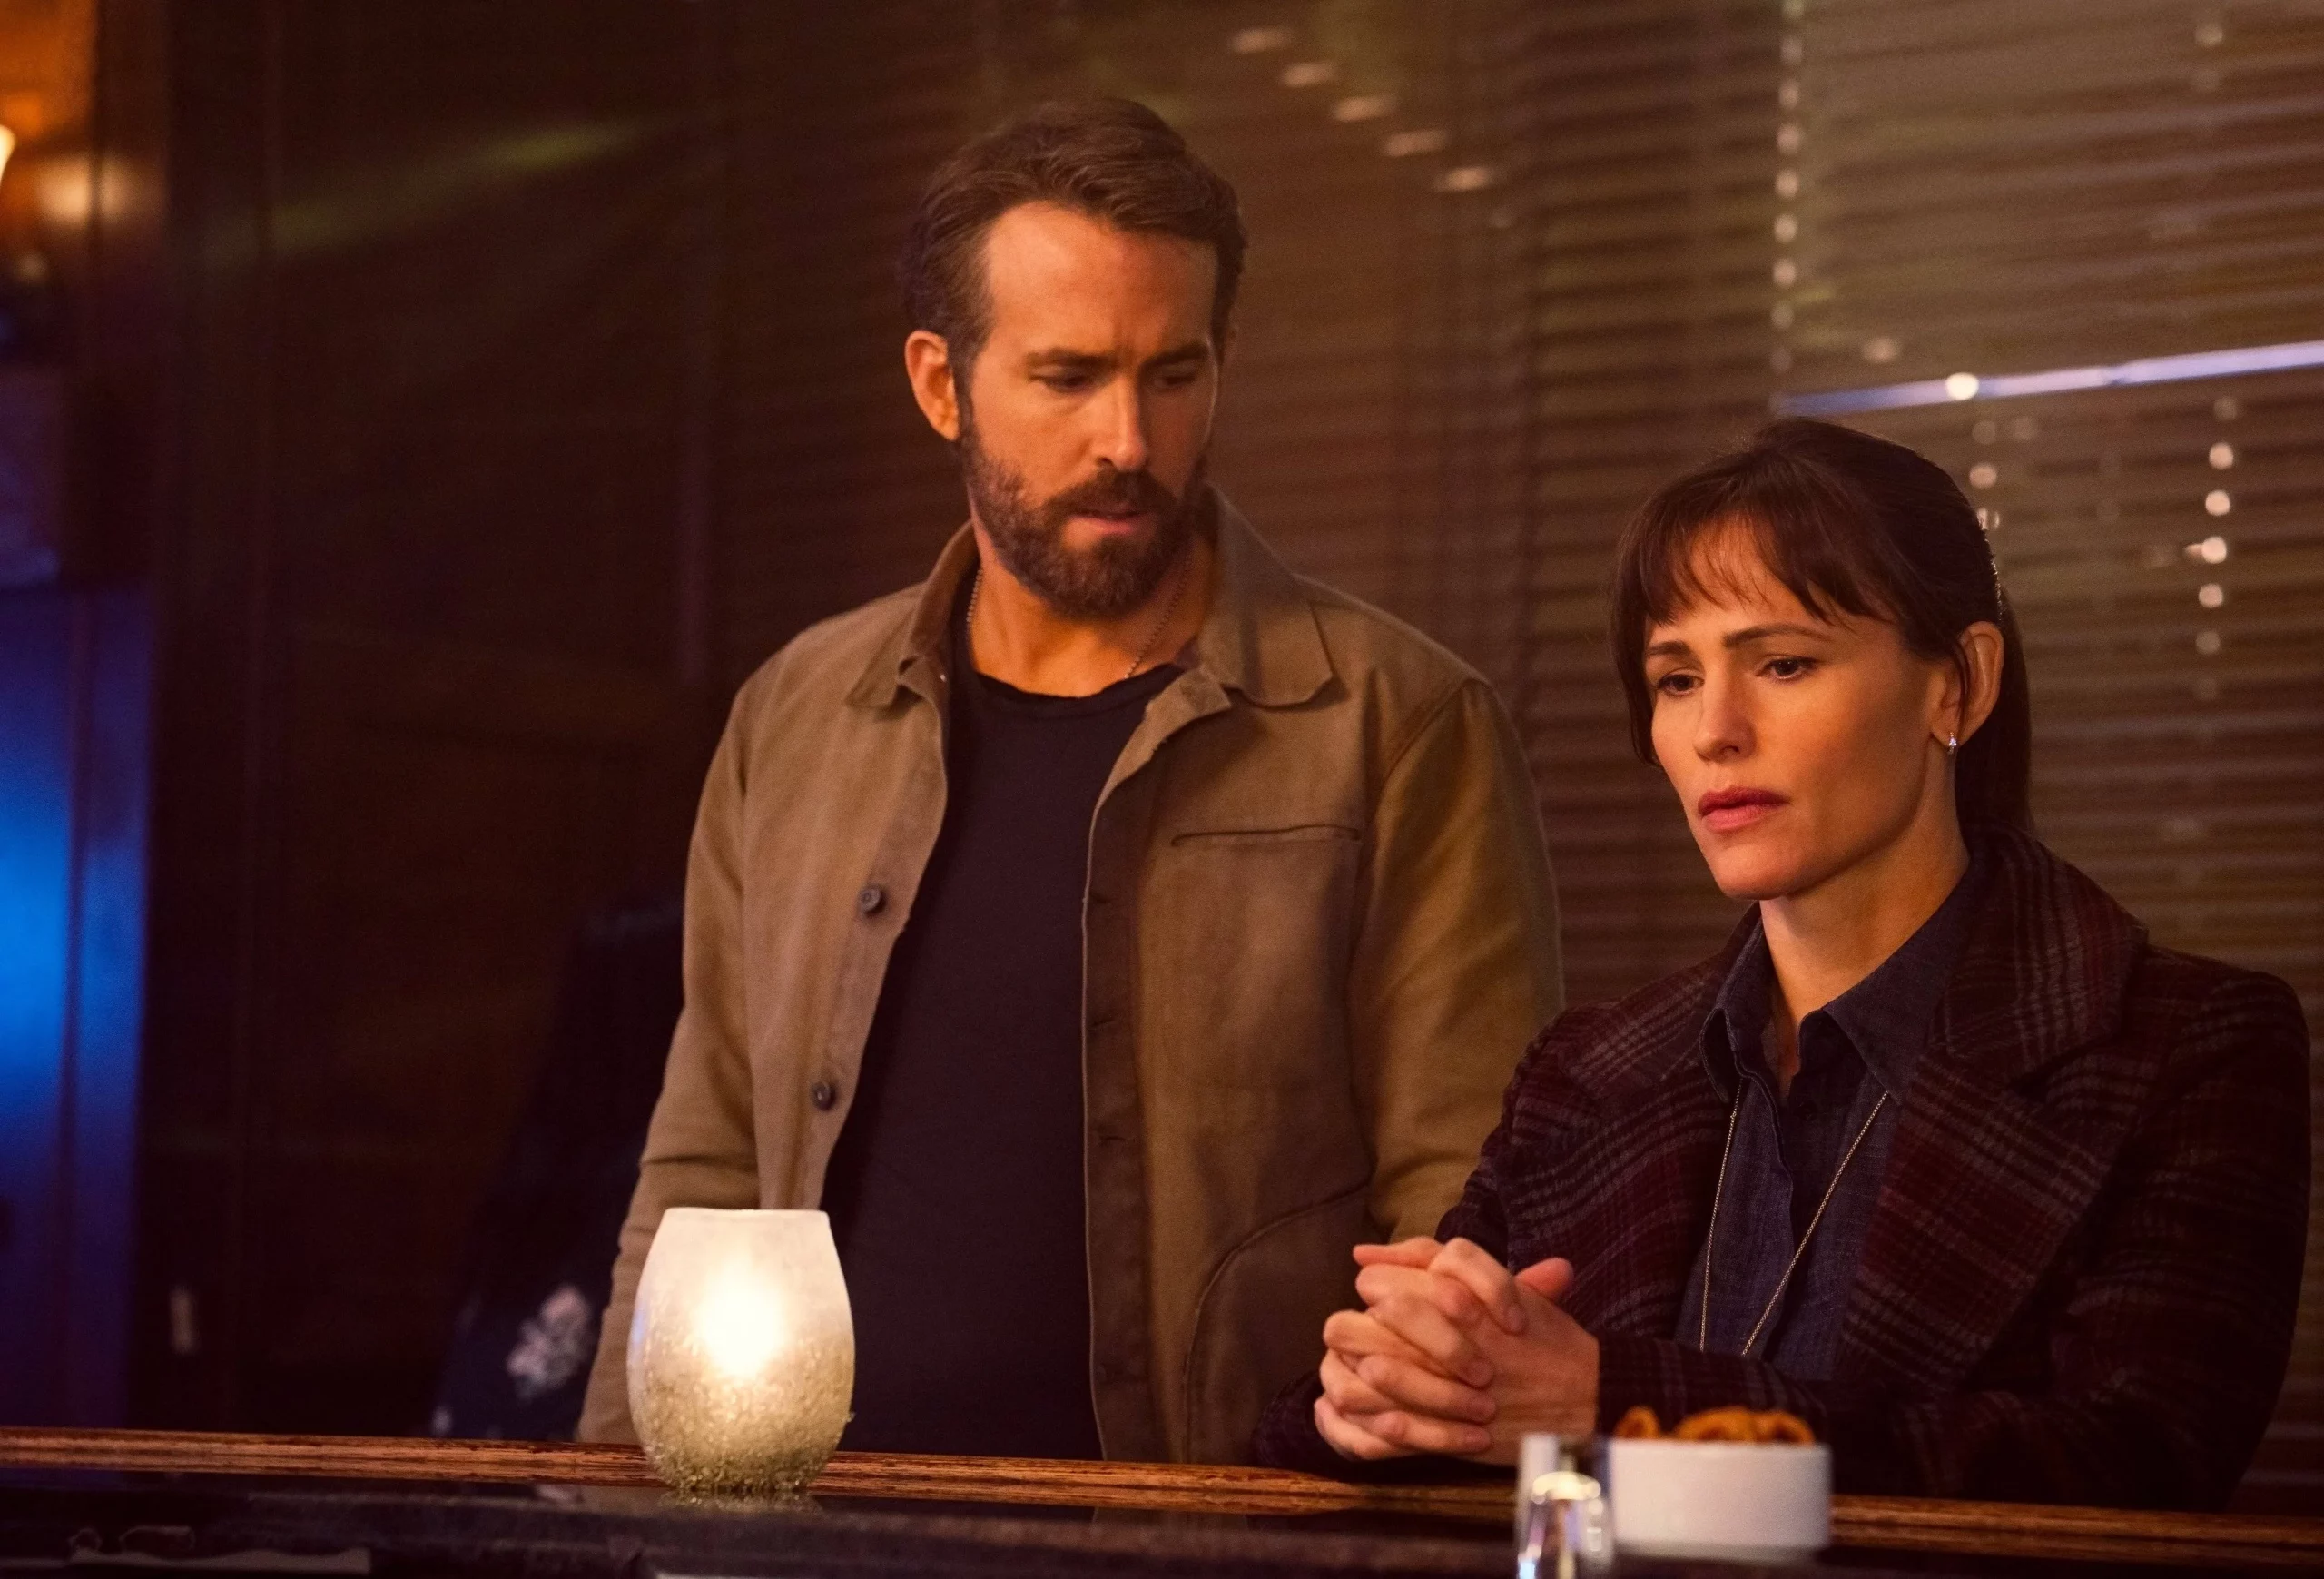 ryan-reynolds-time-travel-film-the-adam-project-released-new-stills-it-will-be-launched-on-netflix-on-march-11-2019-5